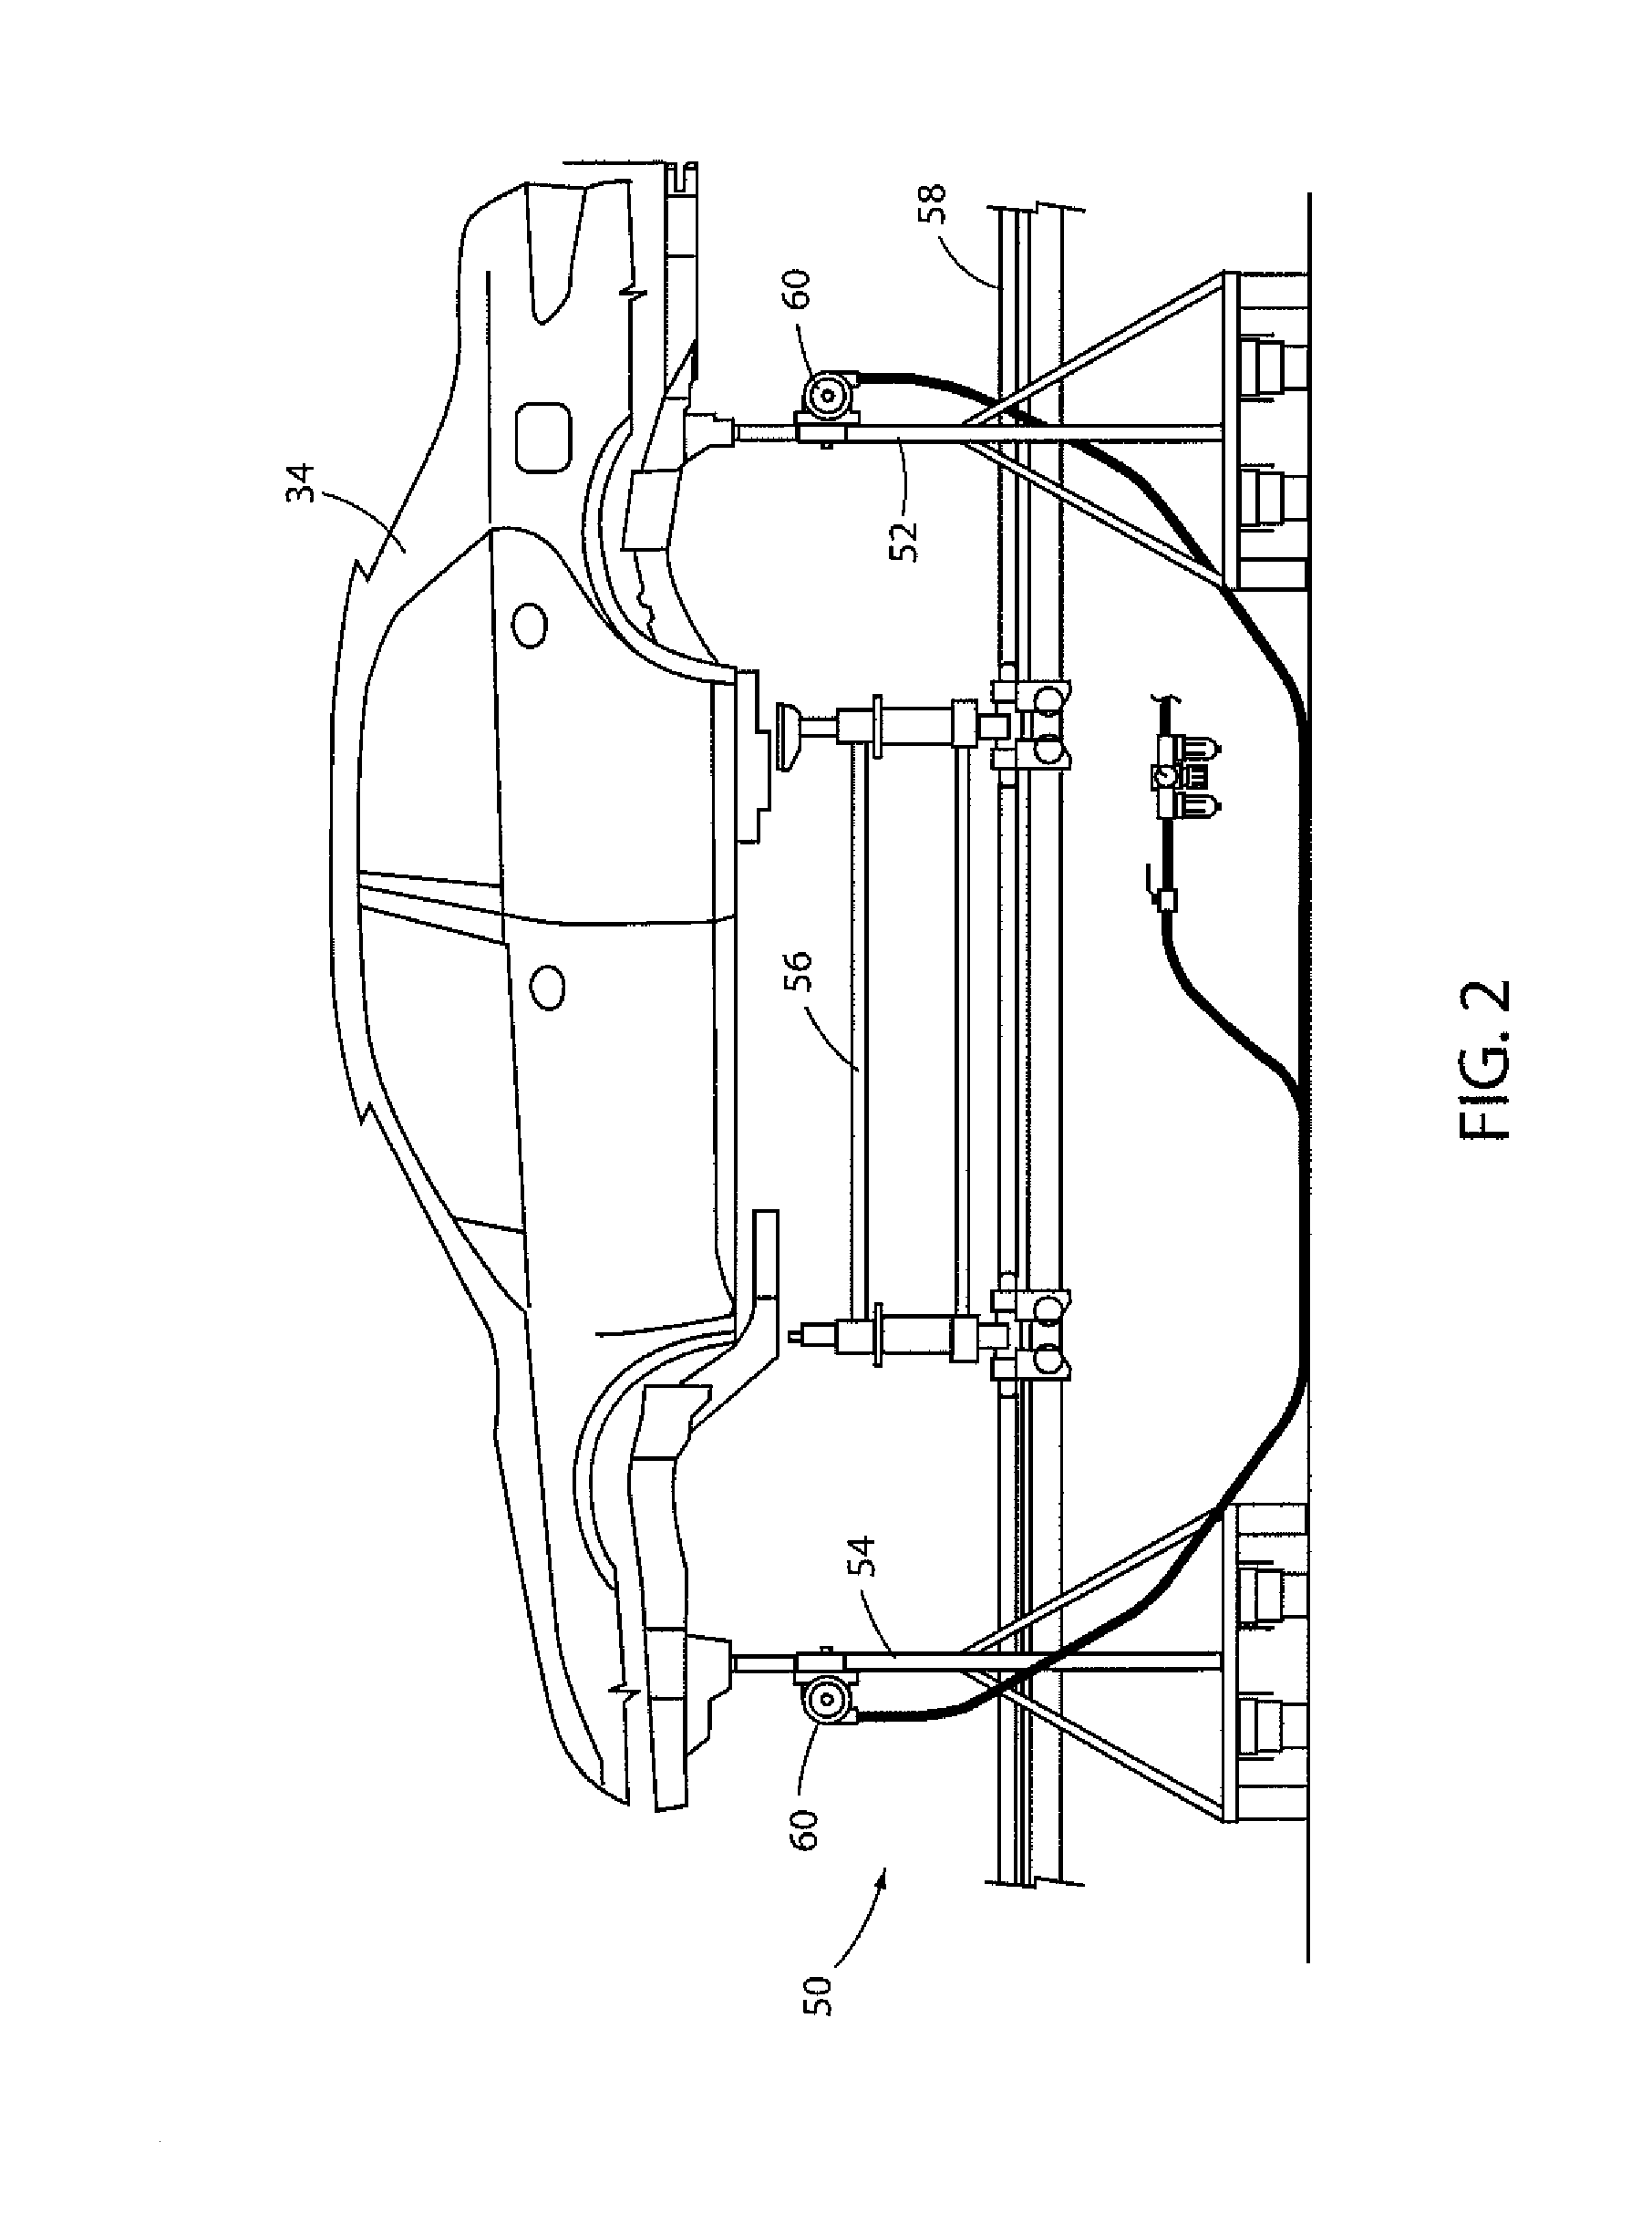 Method and apparatus for removing residue from electrocoated articles